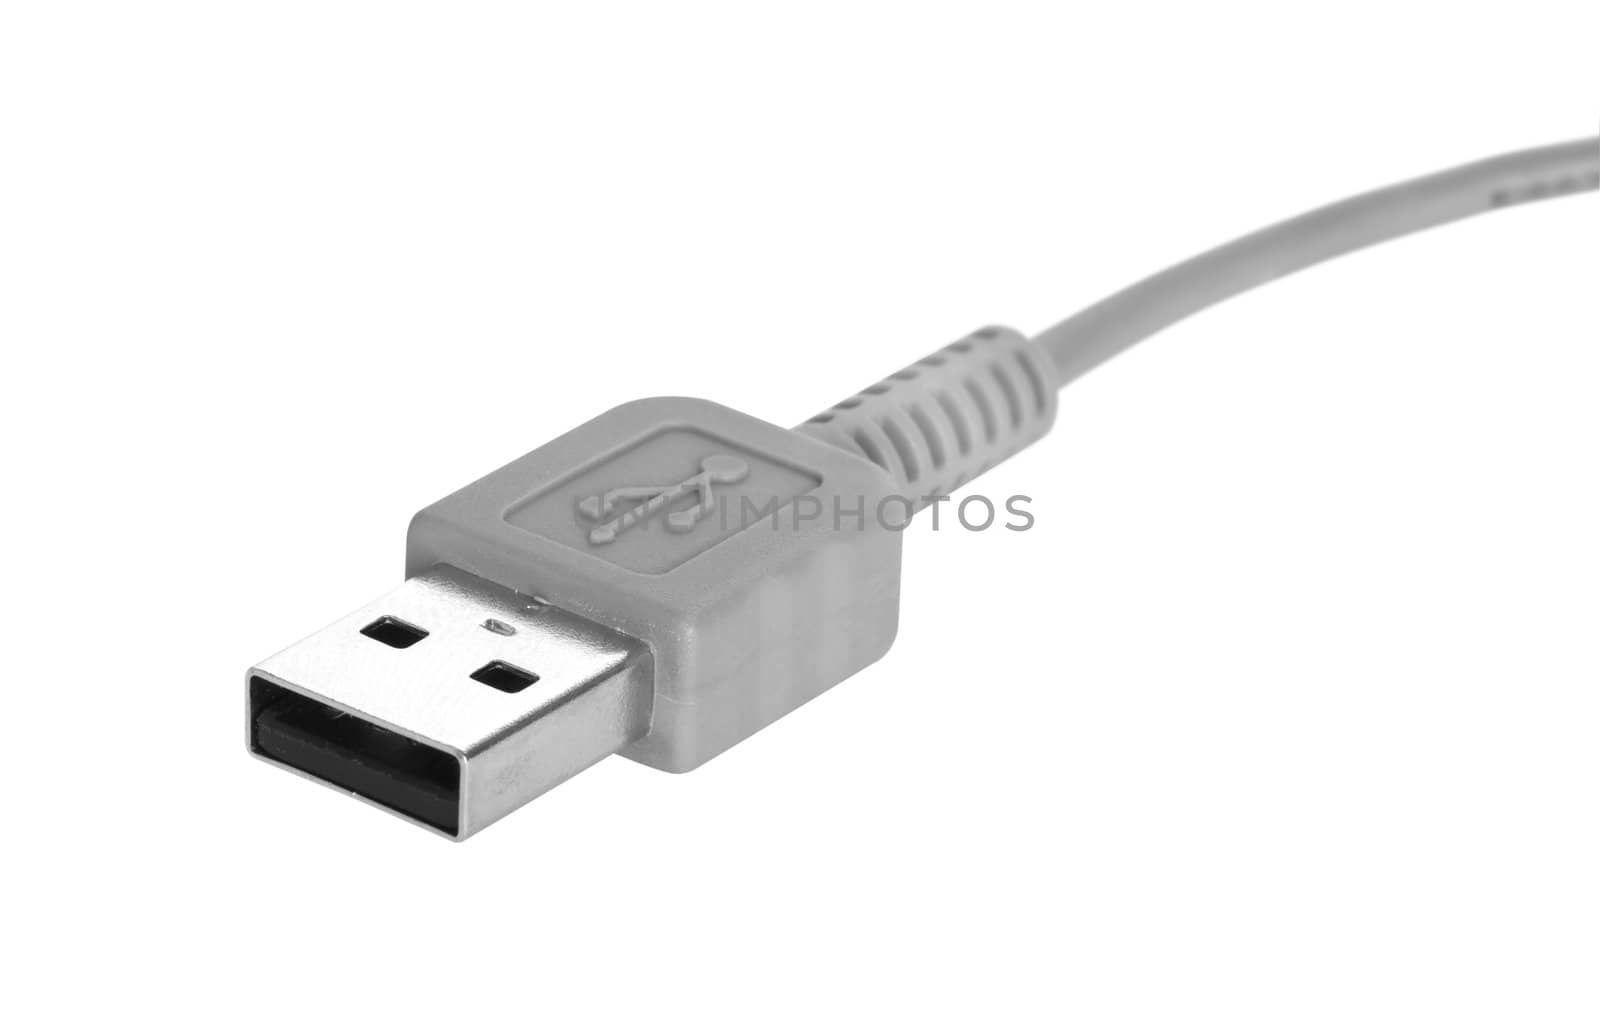 Closeup of USB Conector on White Background